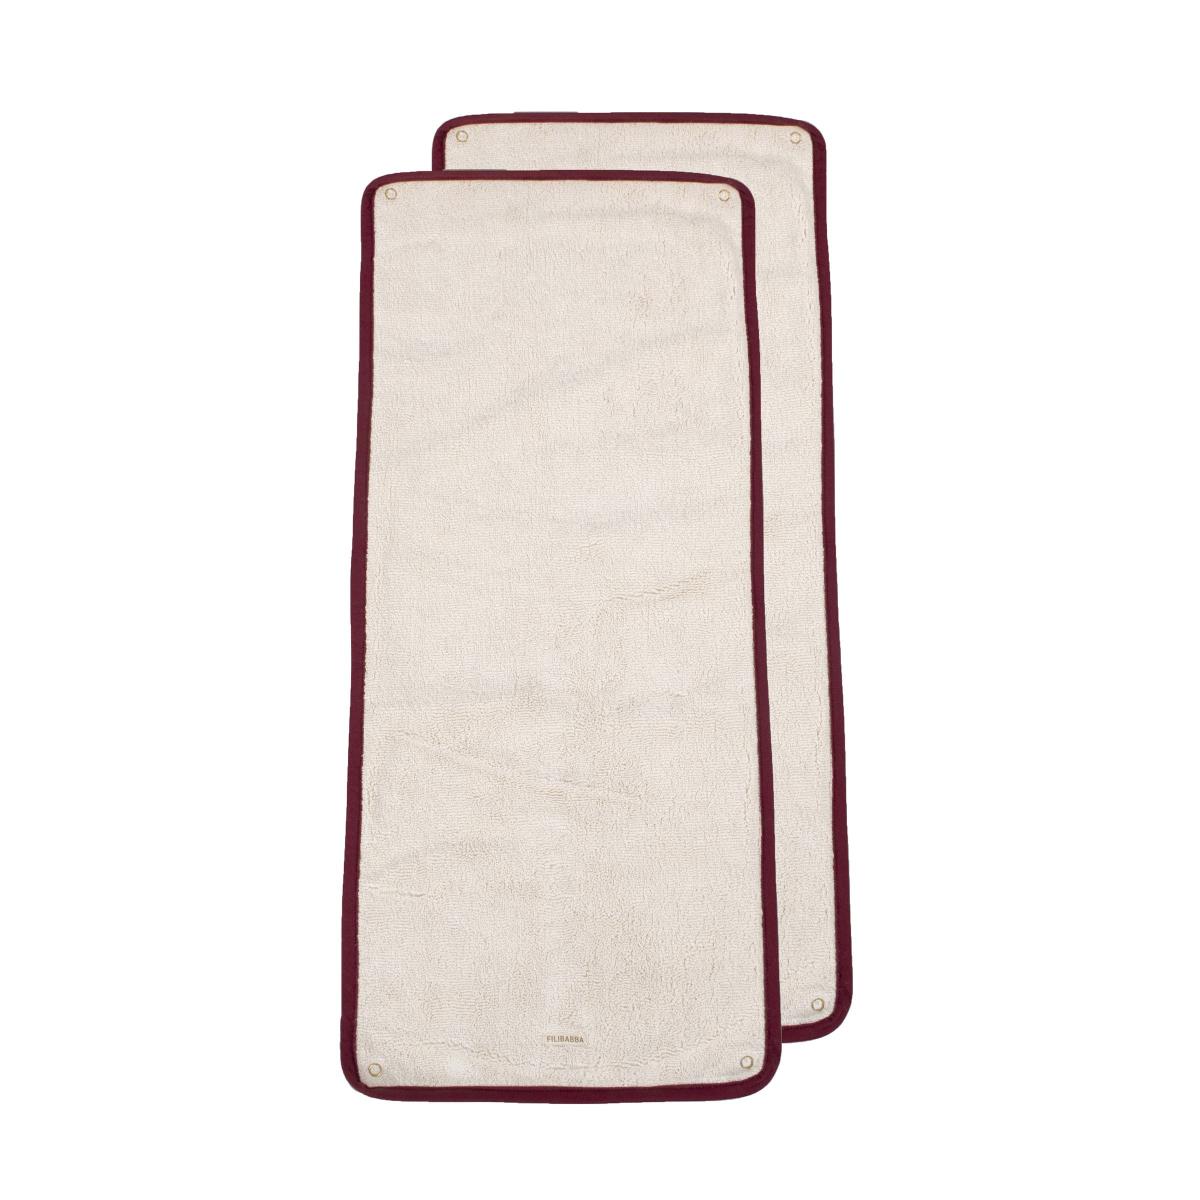 Filibabba - Middle layer 2-pack for Changing Pad - Deeply red